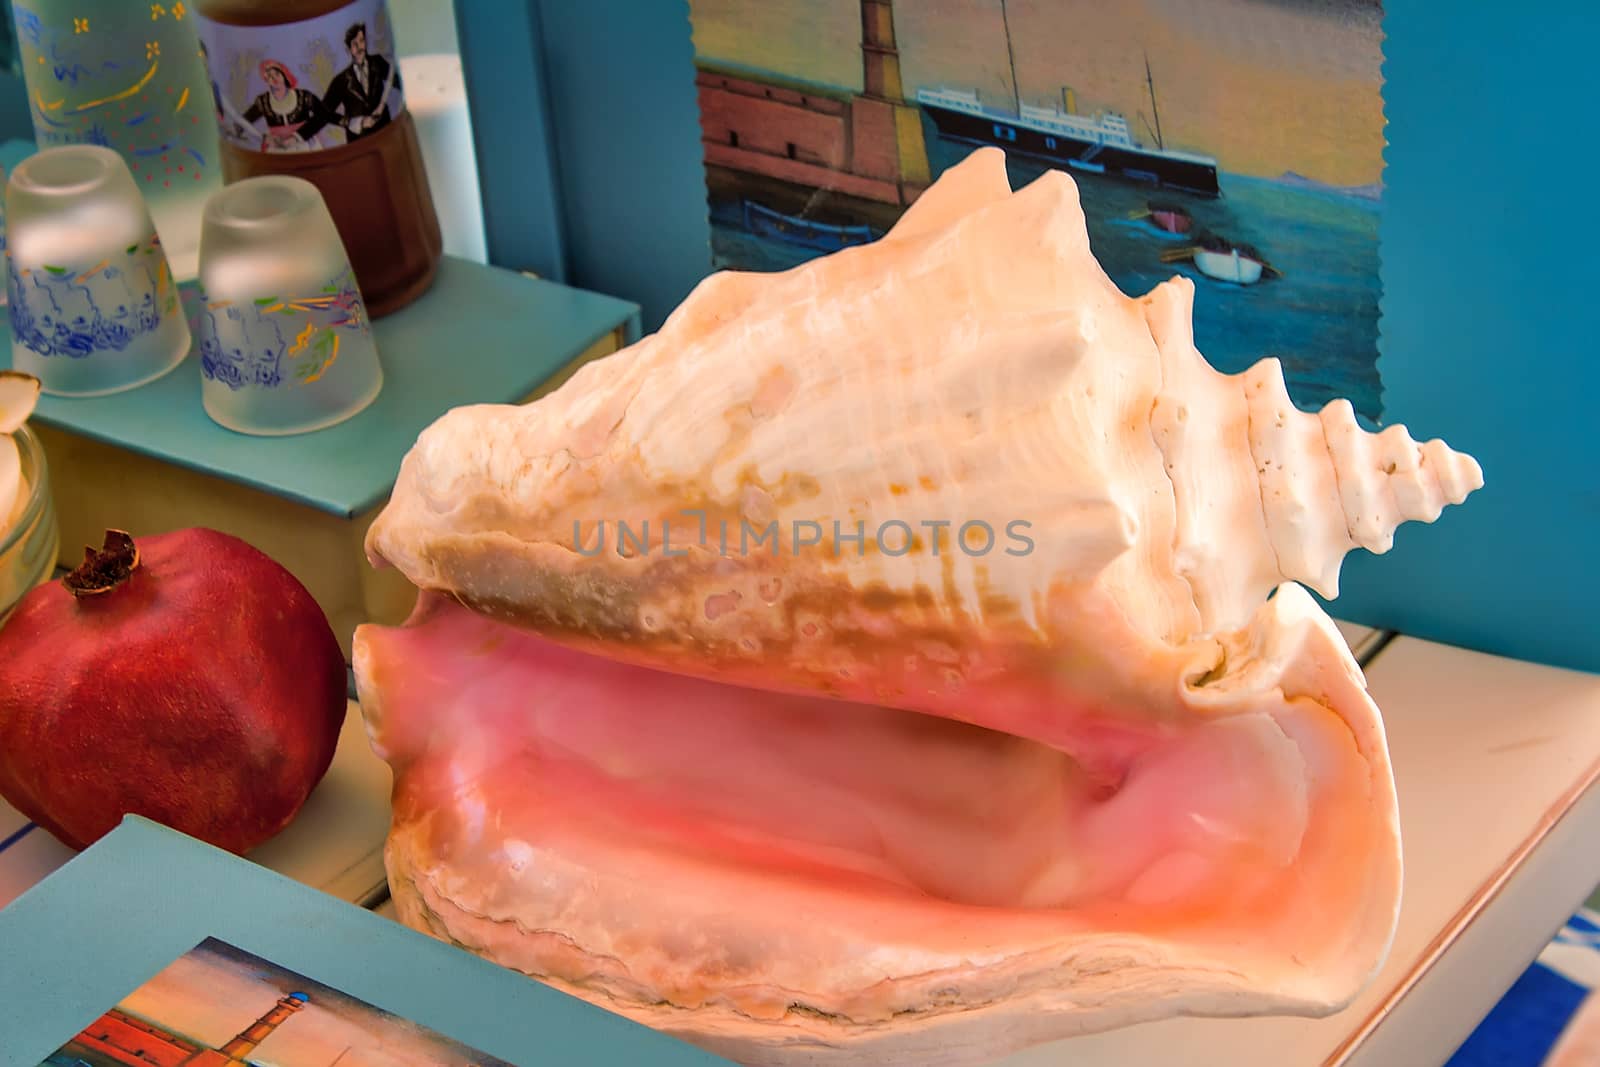 Still life: the table is a large beautiful white-pink sea shell, next to her are books, grenades, and other items.